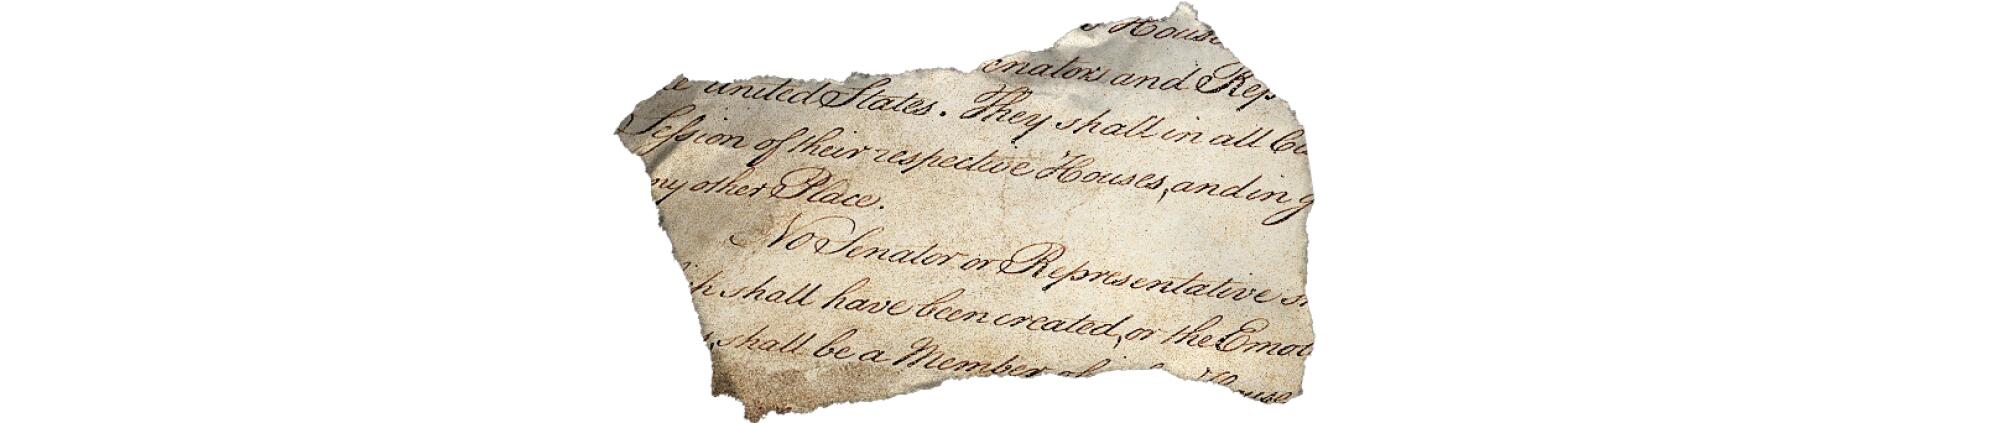 photo illustration of a torn piece of the U.S. Constitution